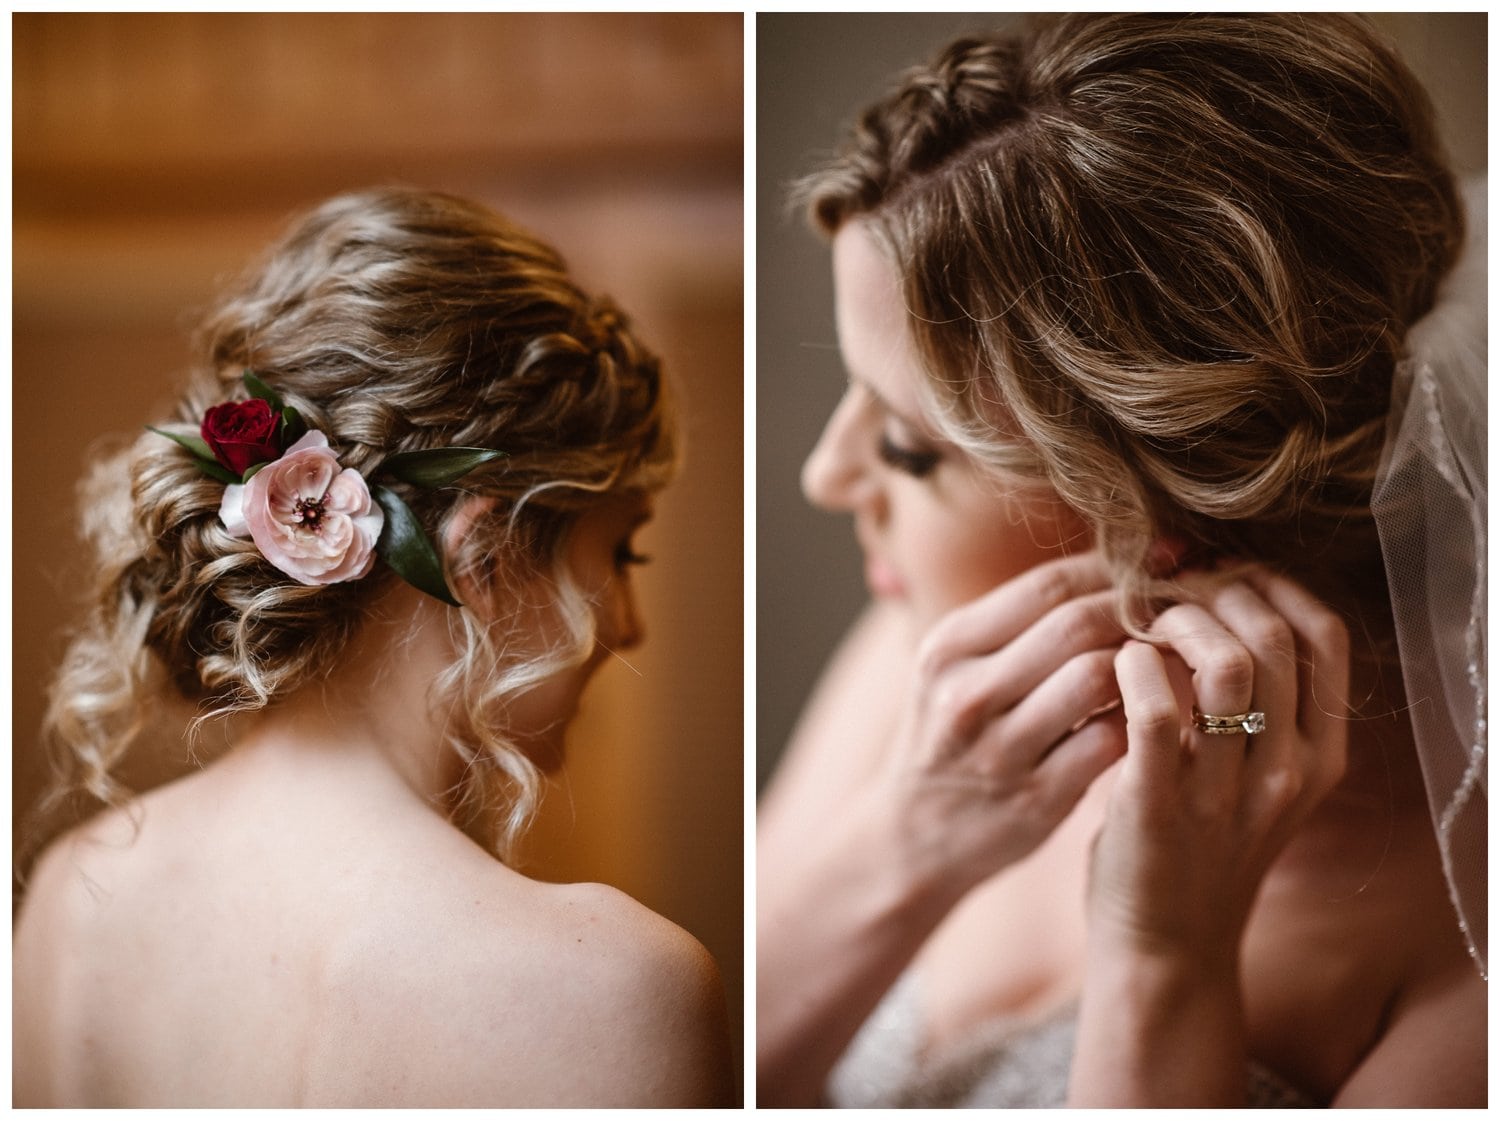 Bride with her hair braided and curled, in an updo with pink and red flowers.